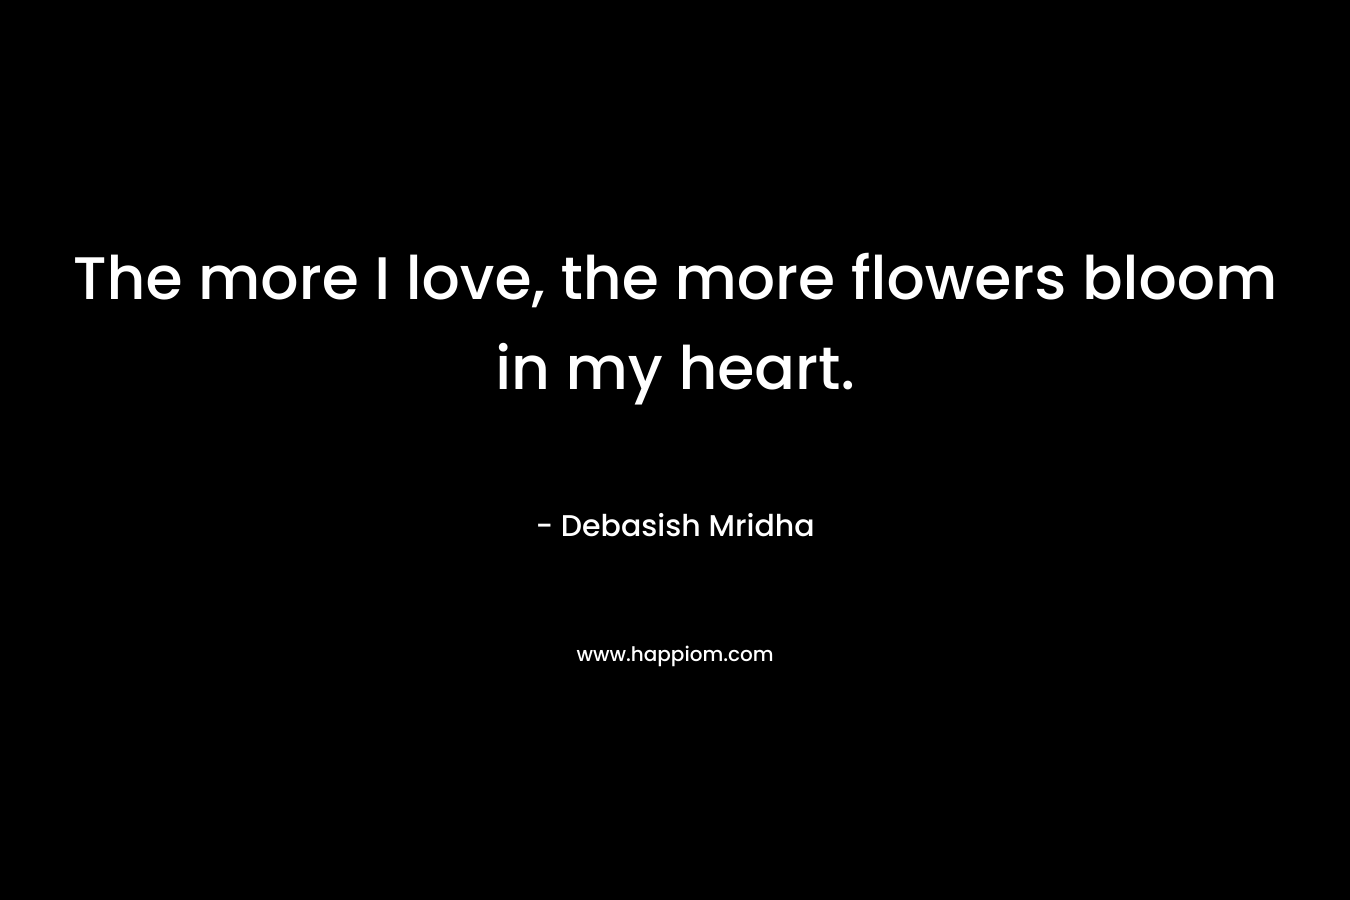 The more I love, the more flowers bloom in my heart. – Debasish Mridha